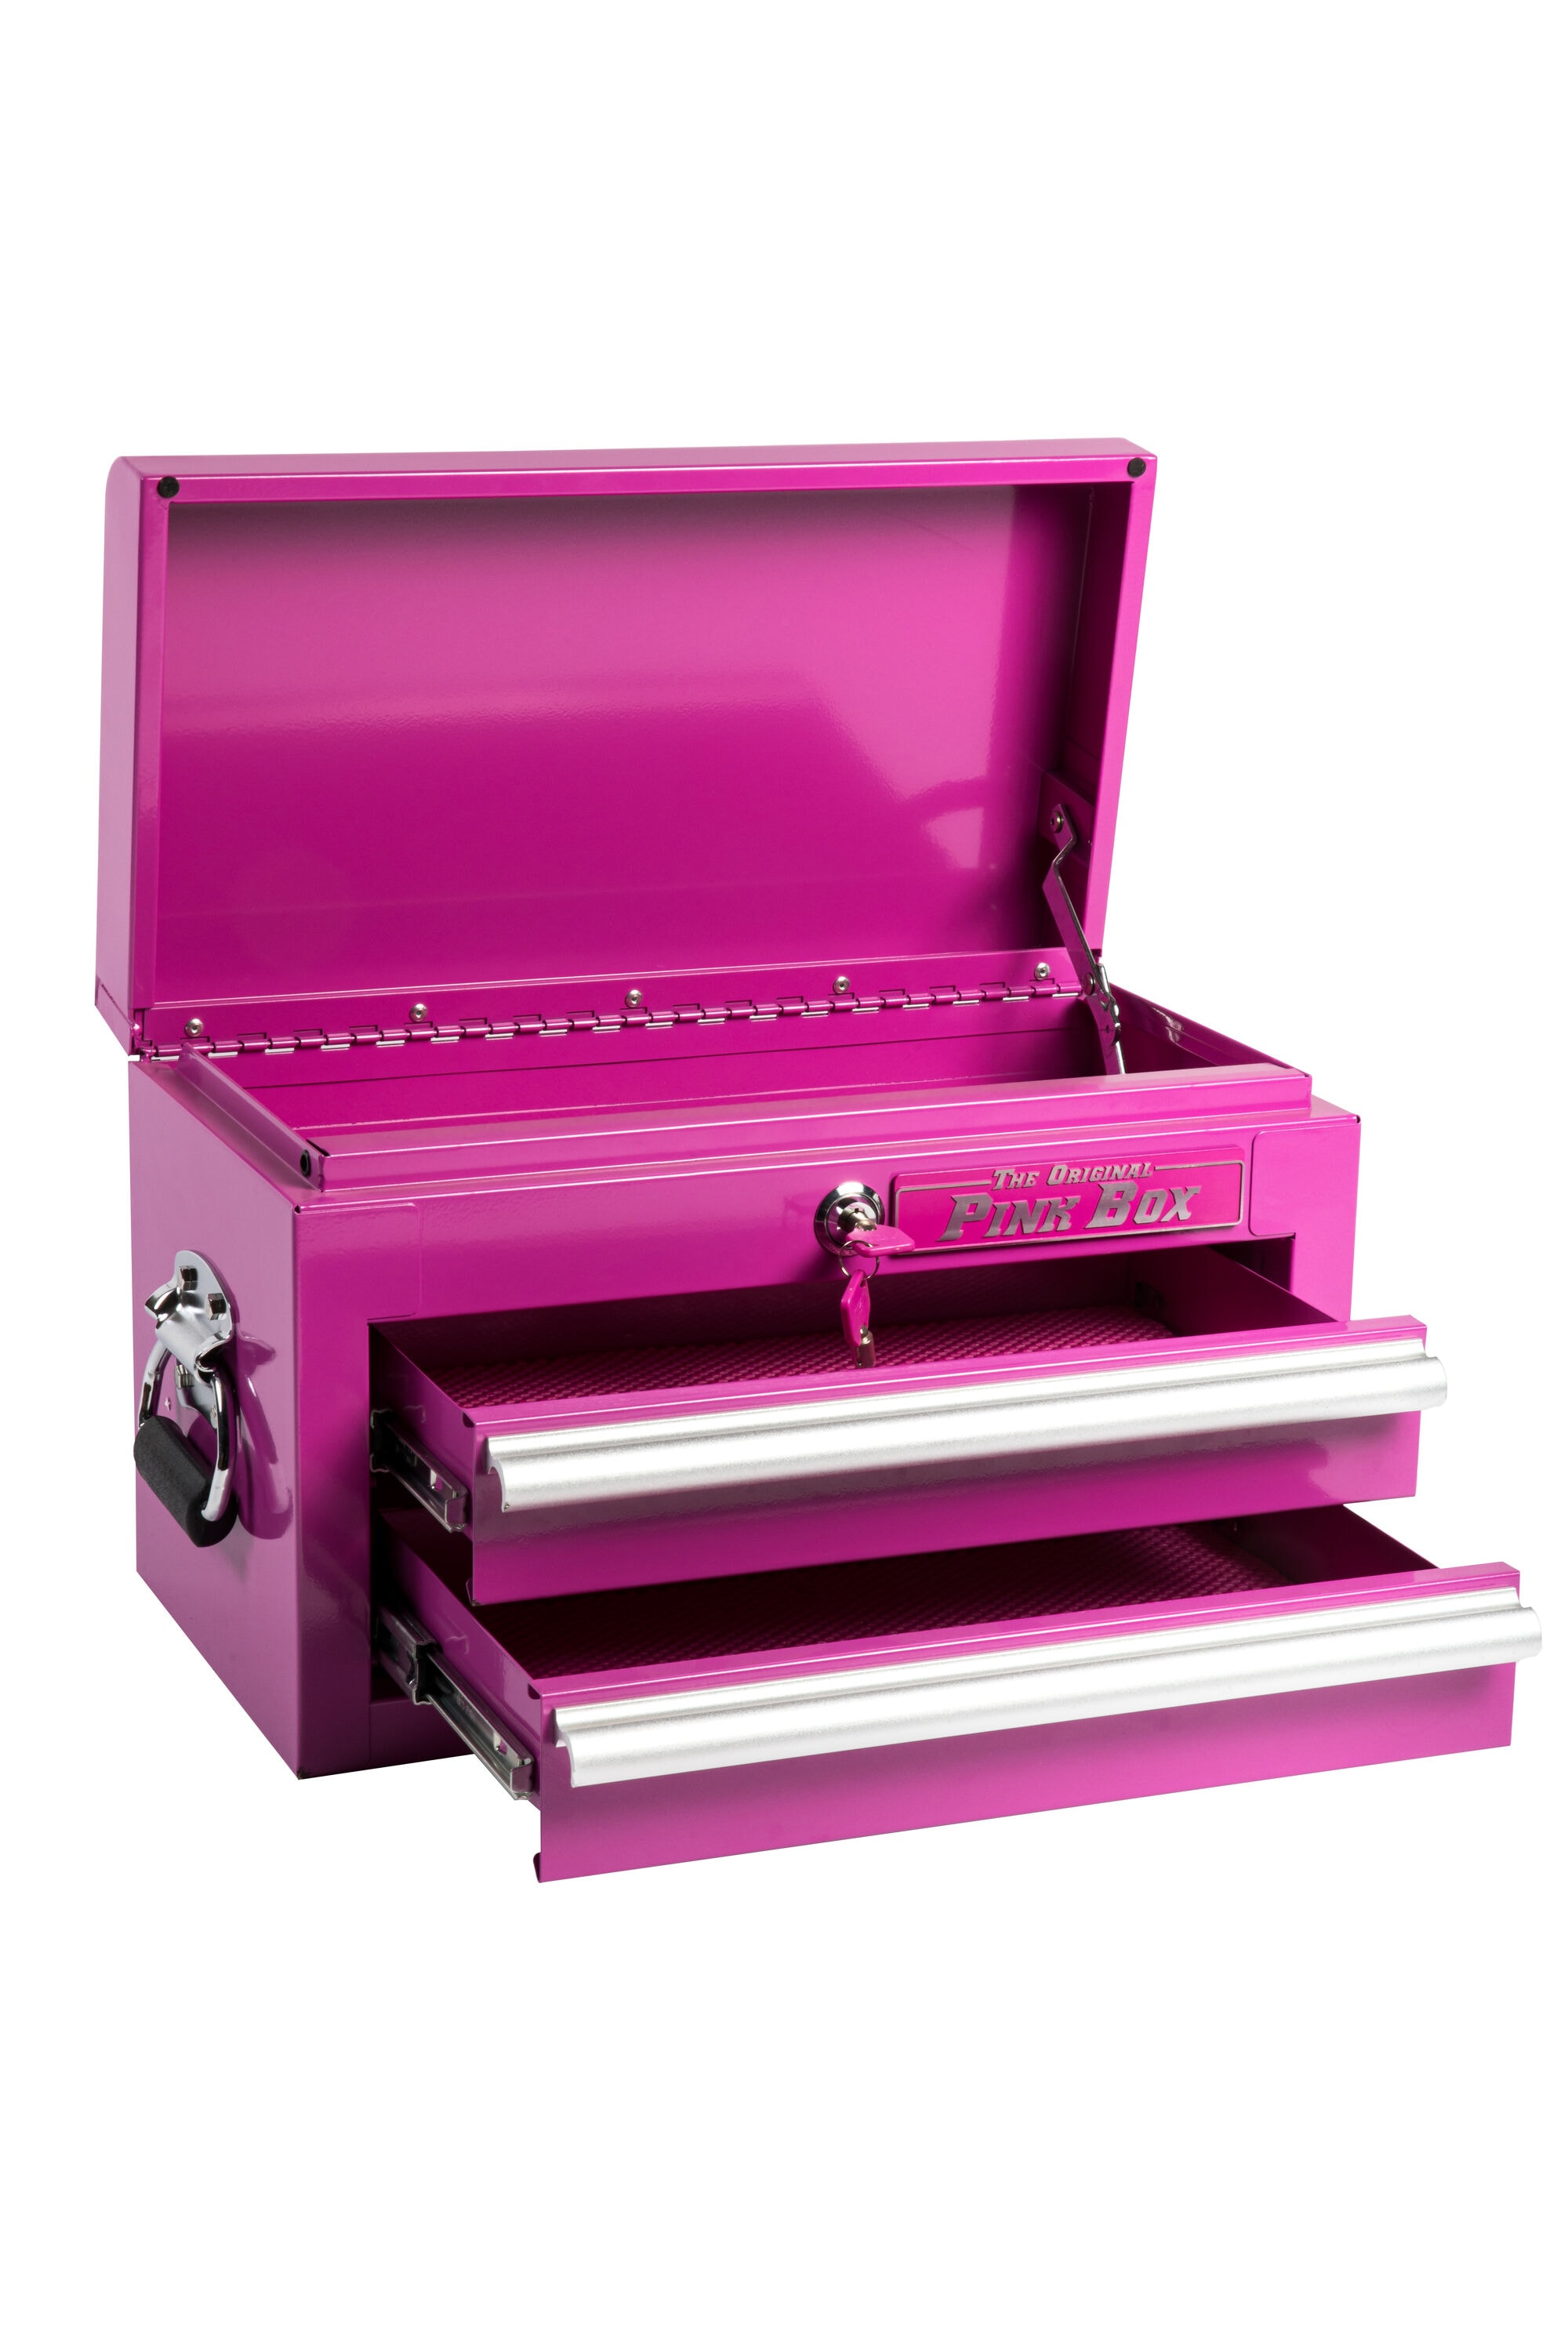 1pc Pink Steel Metal Chest & Drawers Tool Box Carry Case Ladies Styled  Quality